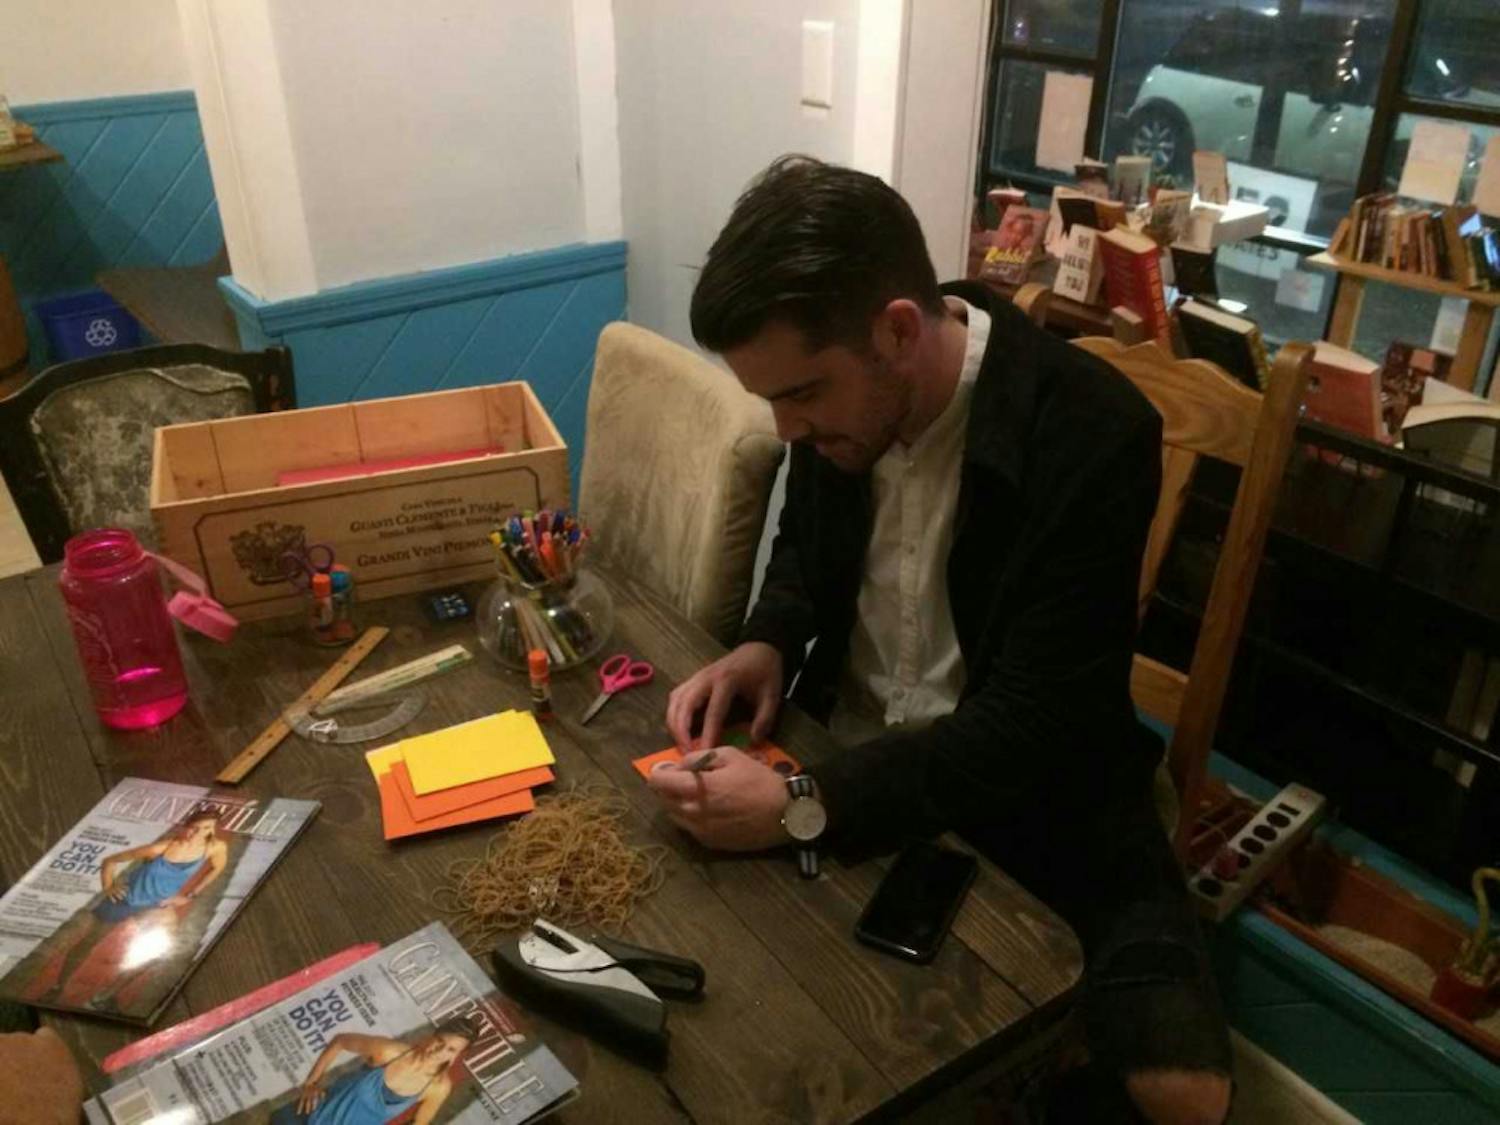 Chris McLeod, 30, works on a zine, or small magazine, at Third House Coffee and Books during the “Create in Place” event.
&nbsp;